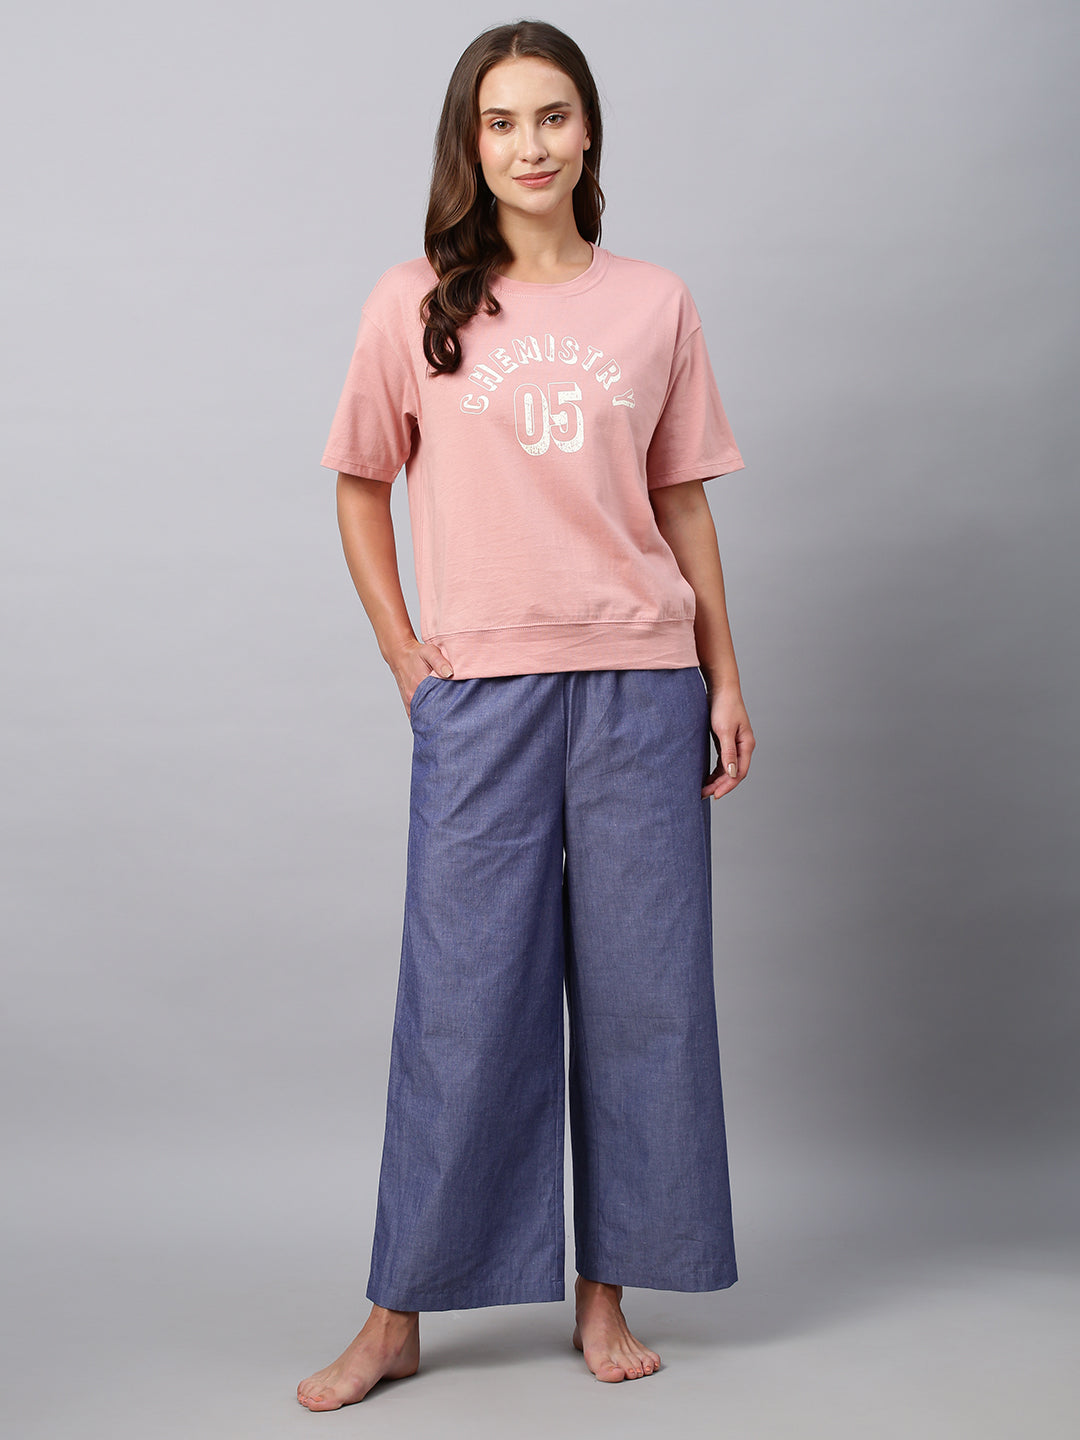 Drop Shoulder Graphic Printed Cotton Jersey Tee W/ Chambray Wide Leg Pj's